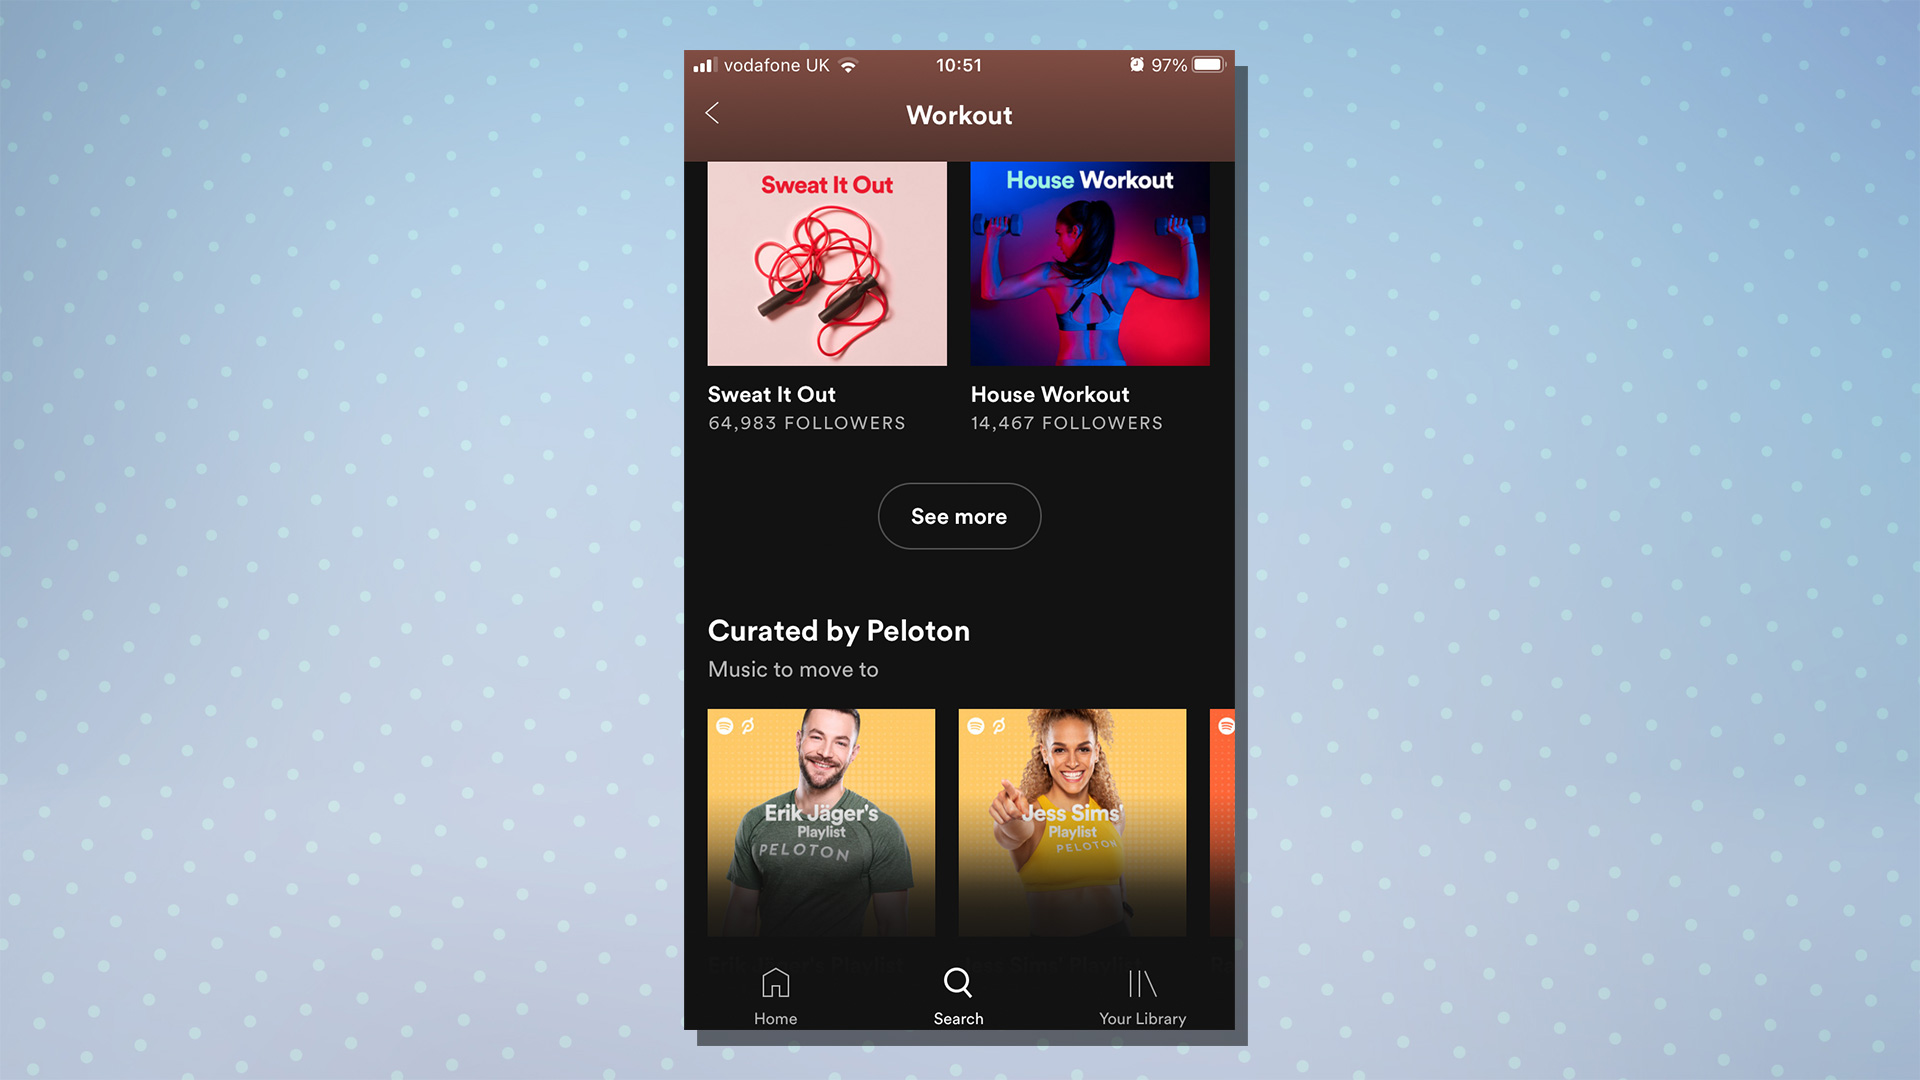 A screenshot from Spotify showing the workout feature